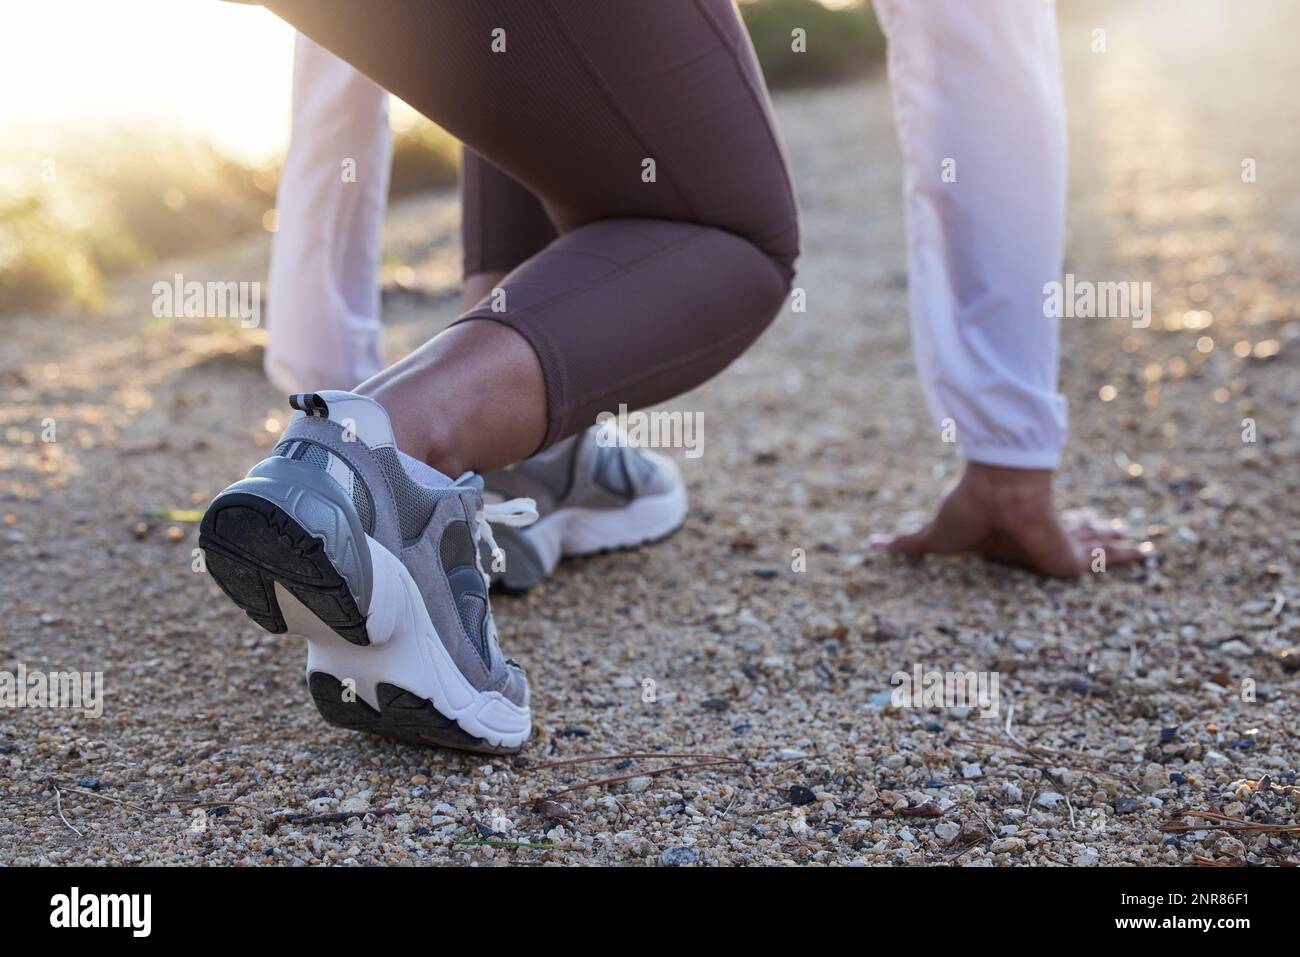 Fitness, shoes or runner ready to start running workout, sports exercise or cardio training outdoors. Wellness, legs or healthy girl with commitment Stock Photo